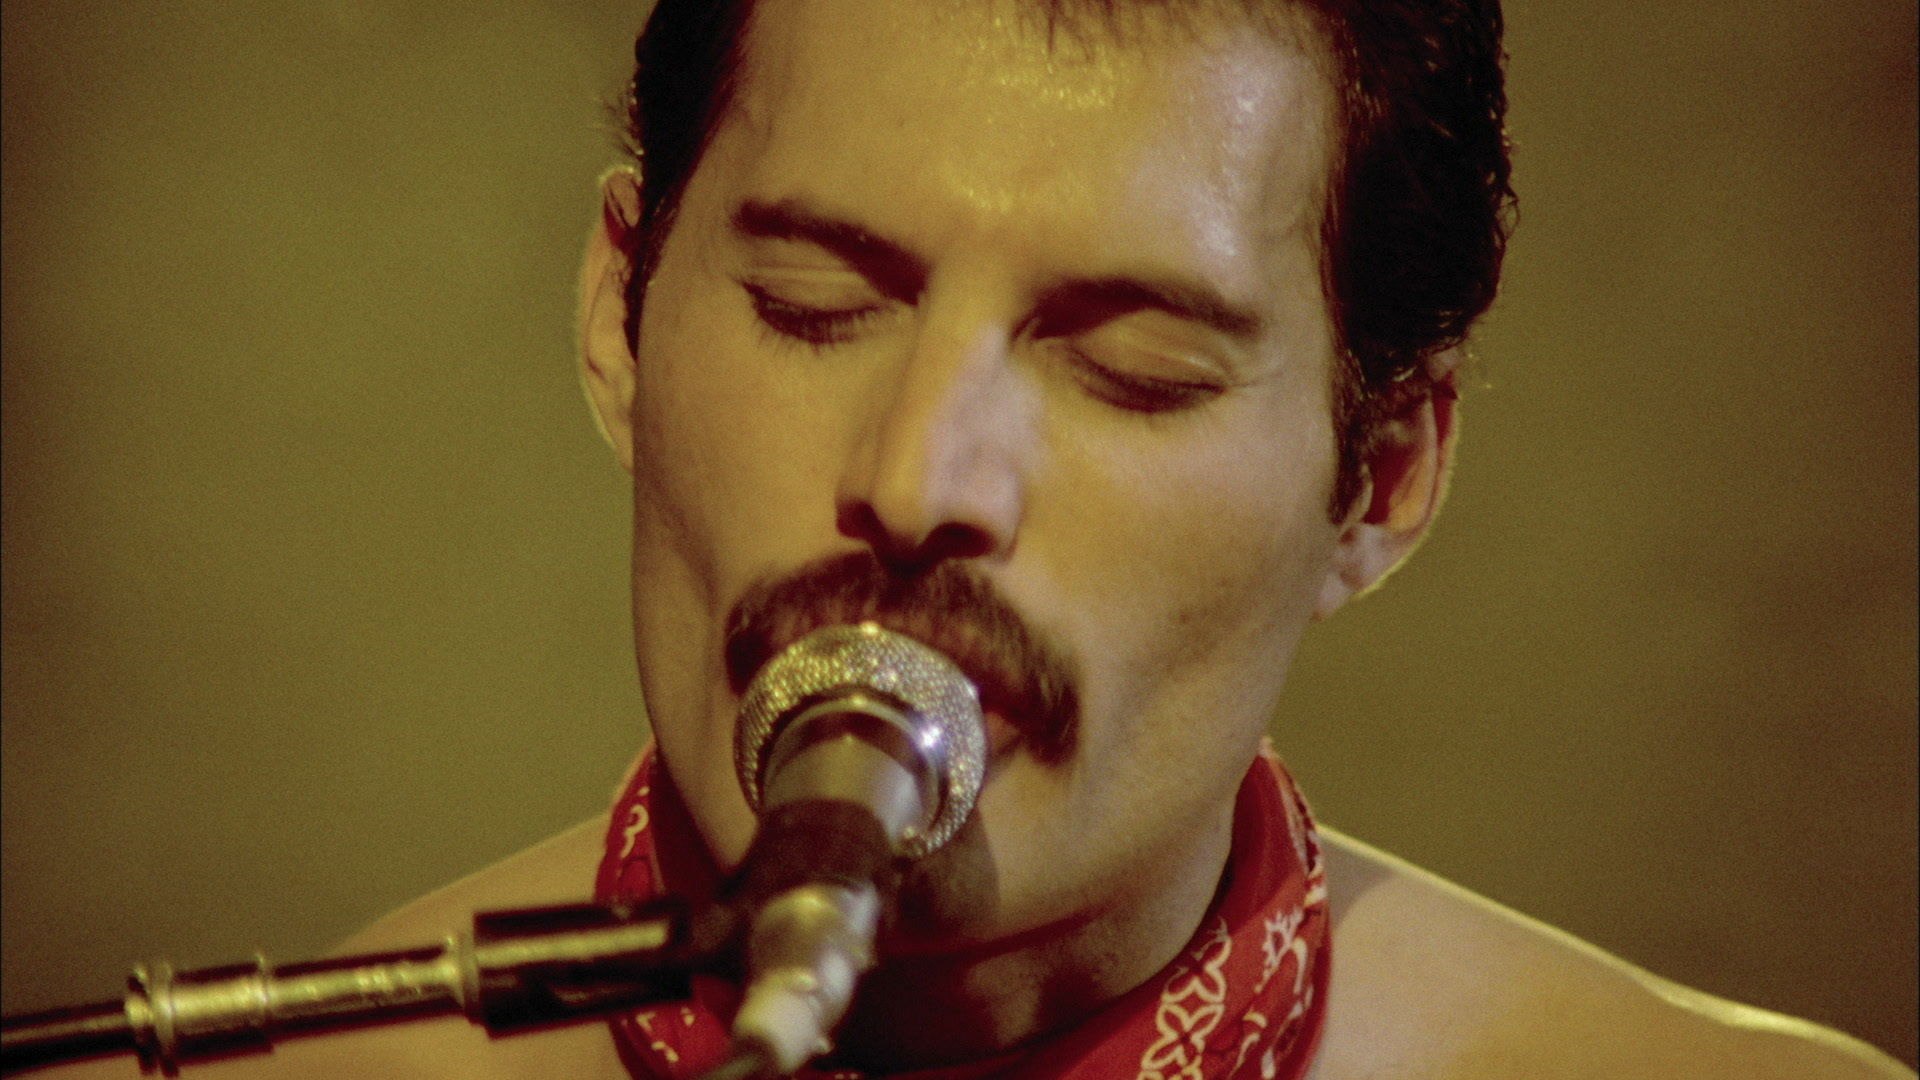 Queen - We Are The Champions - video Dailymotion